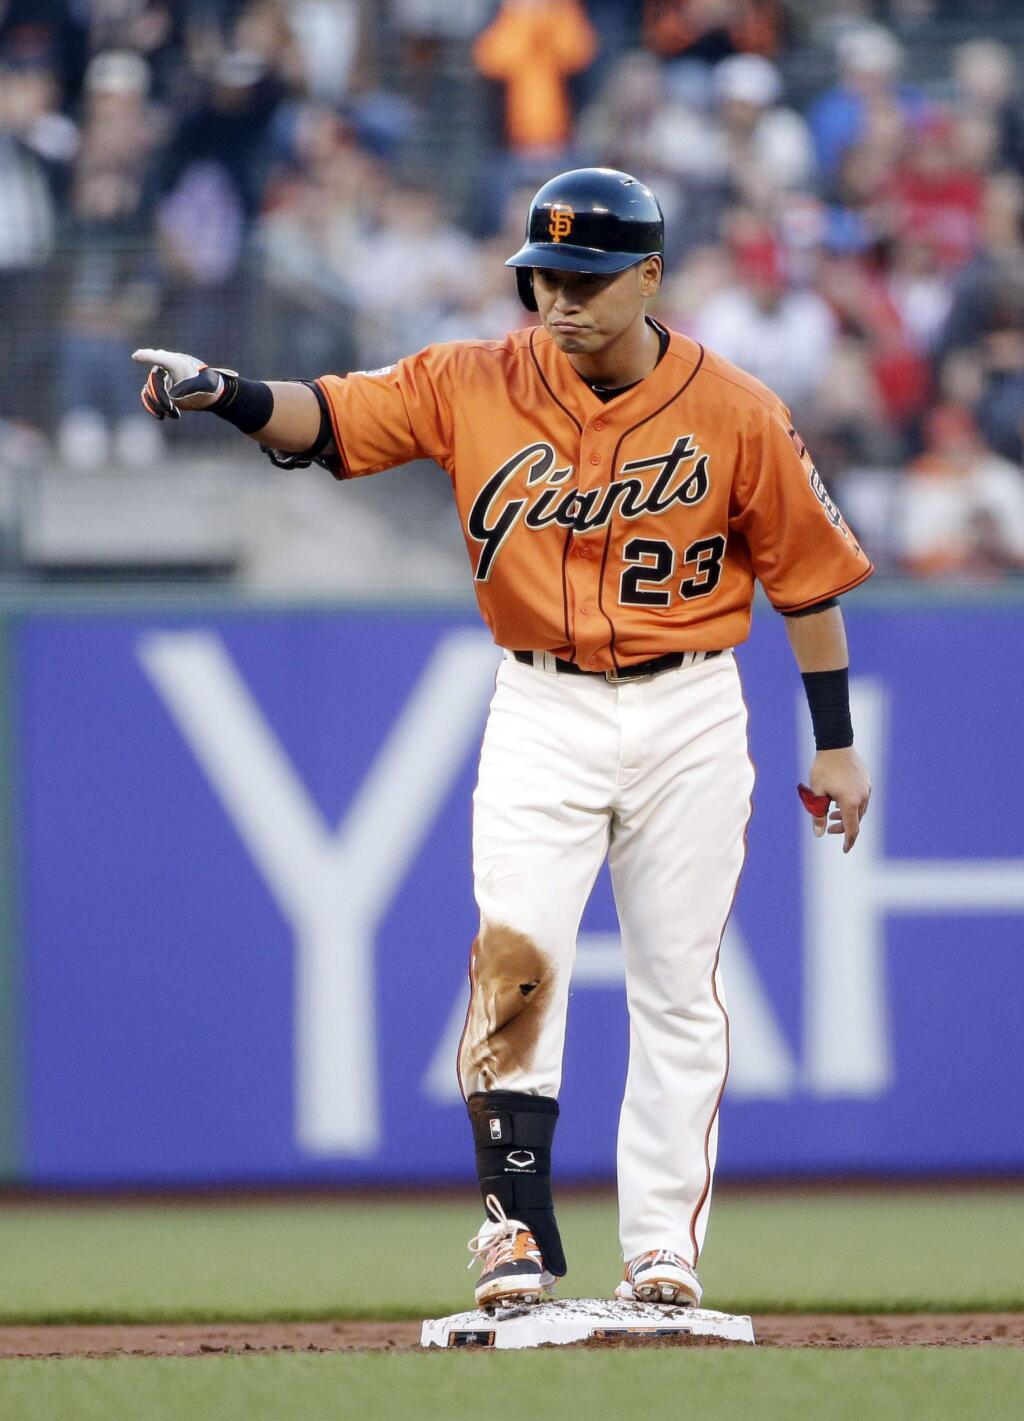 San Francisco Giants' Nori Aoki points to the dugout after hitting a double against the Los Angeles Angels during the first inning of a baseball game on Friday, May 1, 2015, in San Francisco. (AP Photo/Marcio Jose Sanchez)